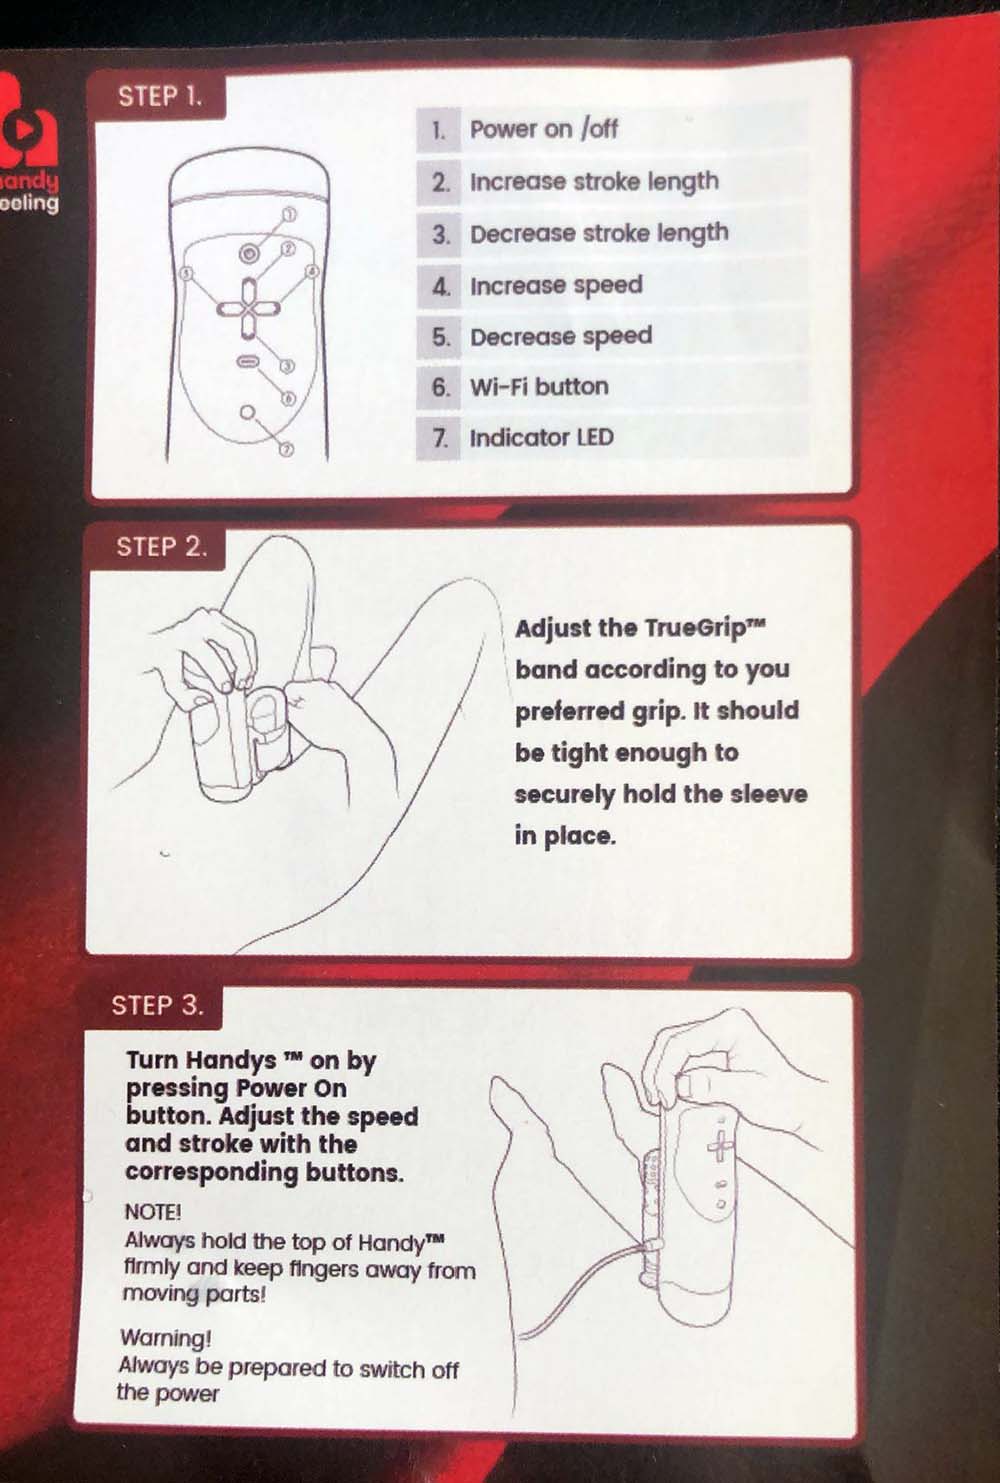 The manual on how to use it